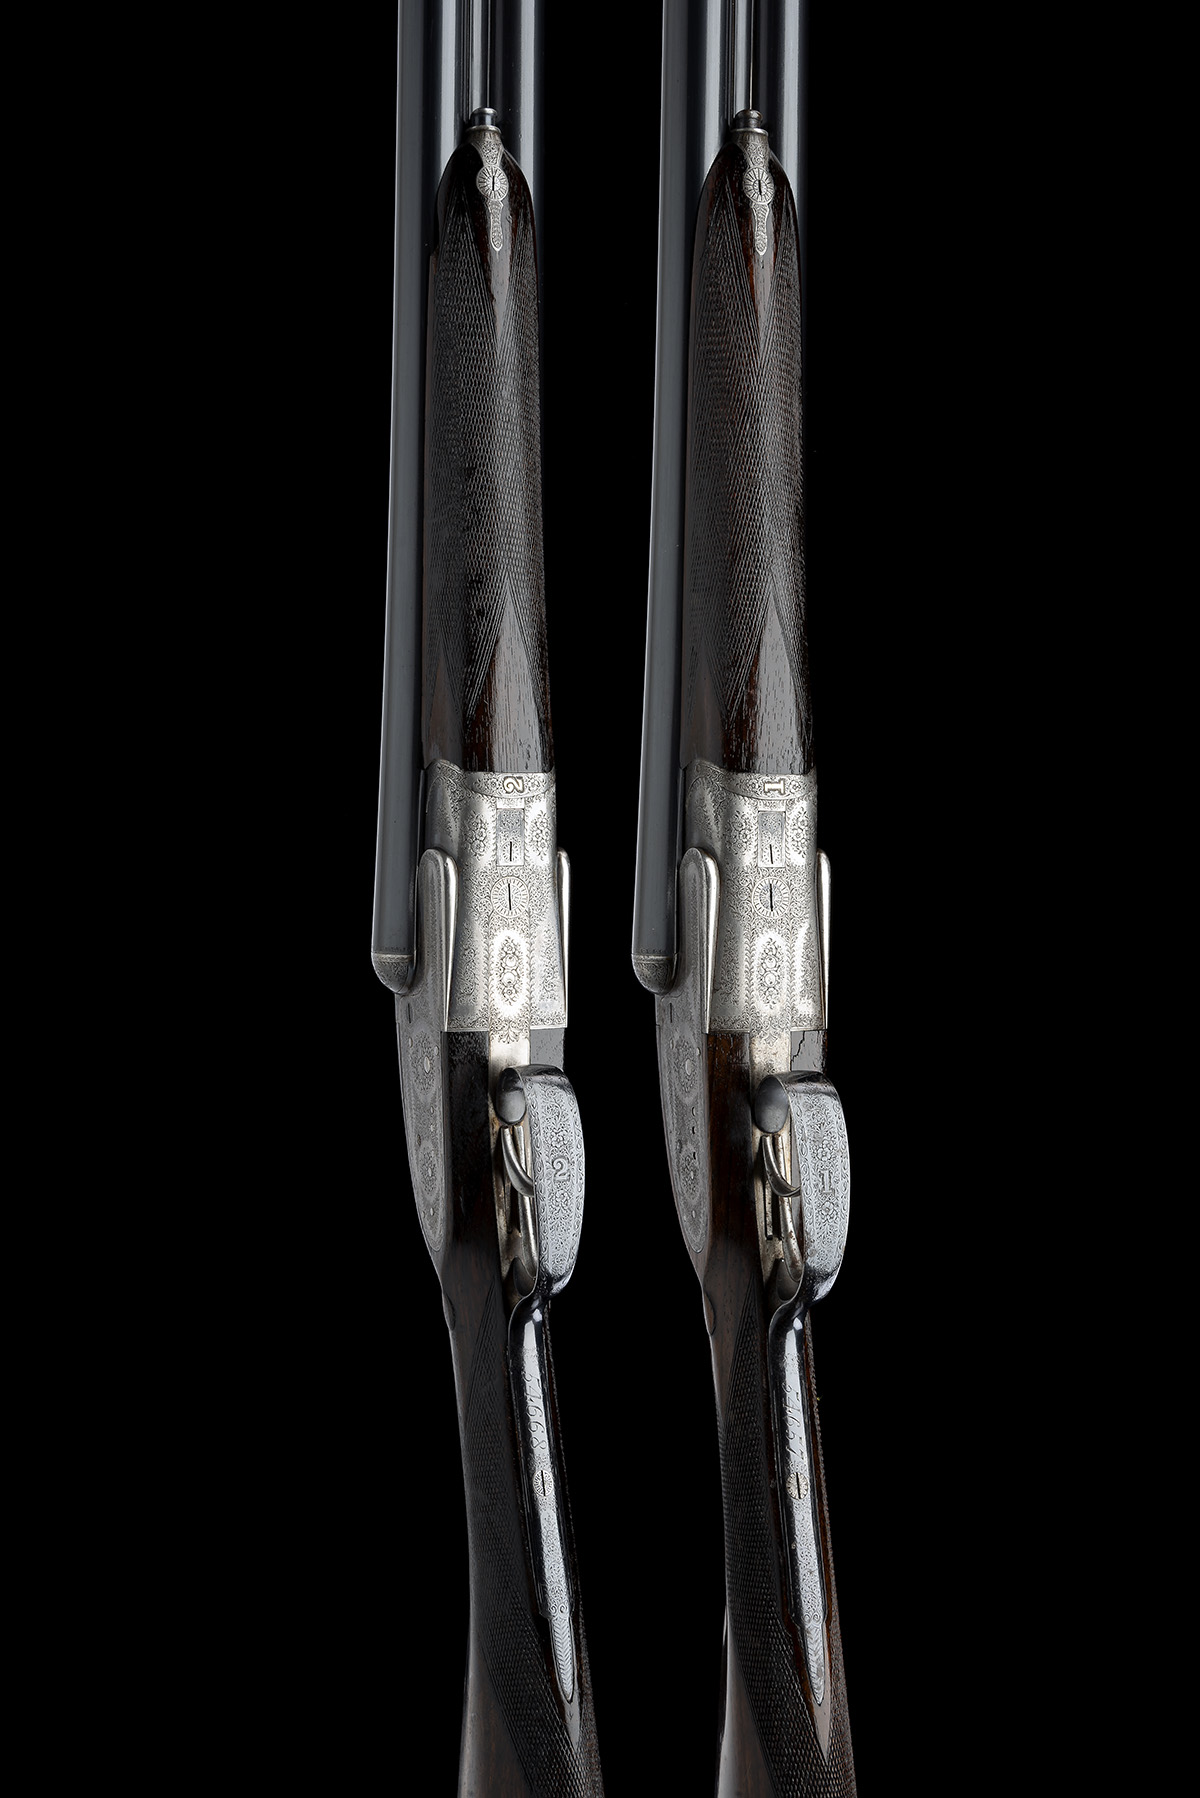 P. WEBLEY & SONS A COMPOSED PAIR OF 12-BORE SIDELOCK EJECTORS, serial no. 54657 / 54668, circa 1898, - Image 3 of 11